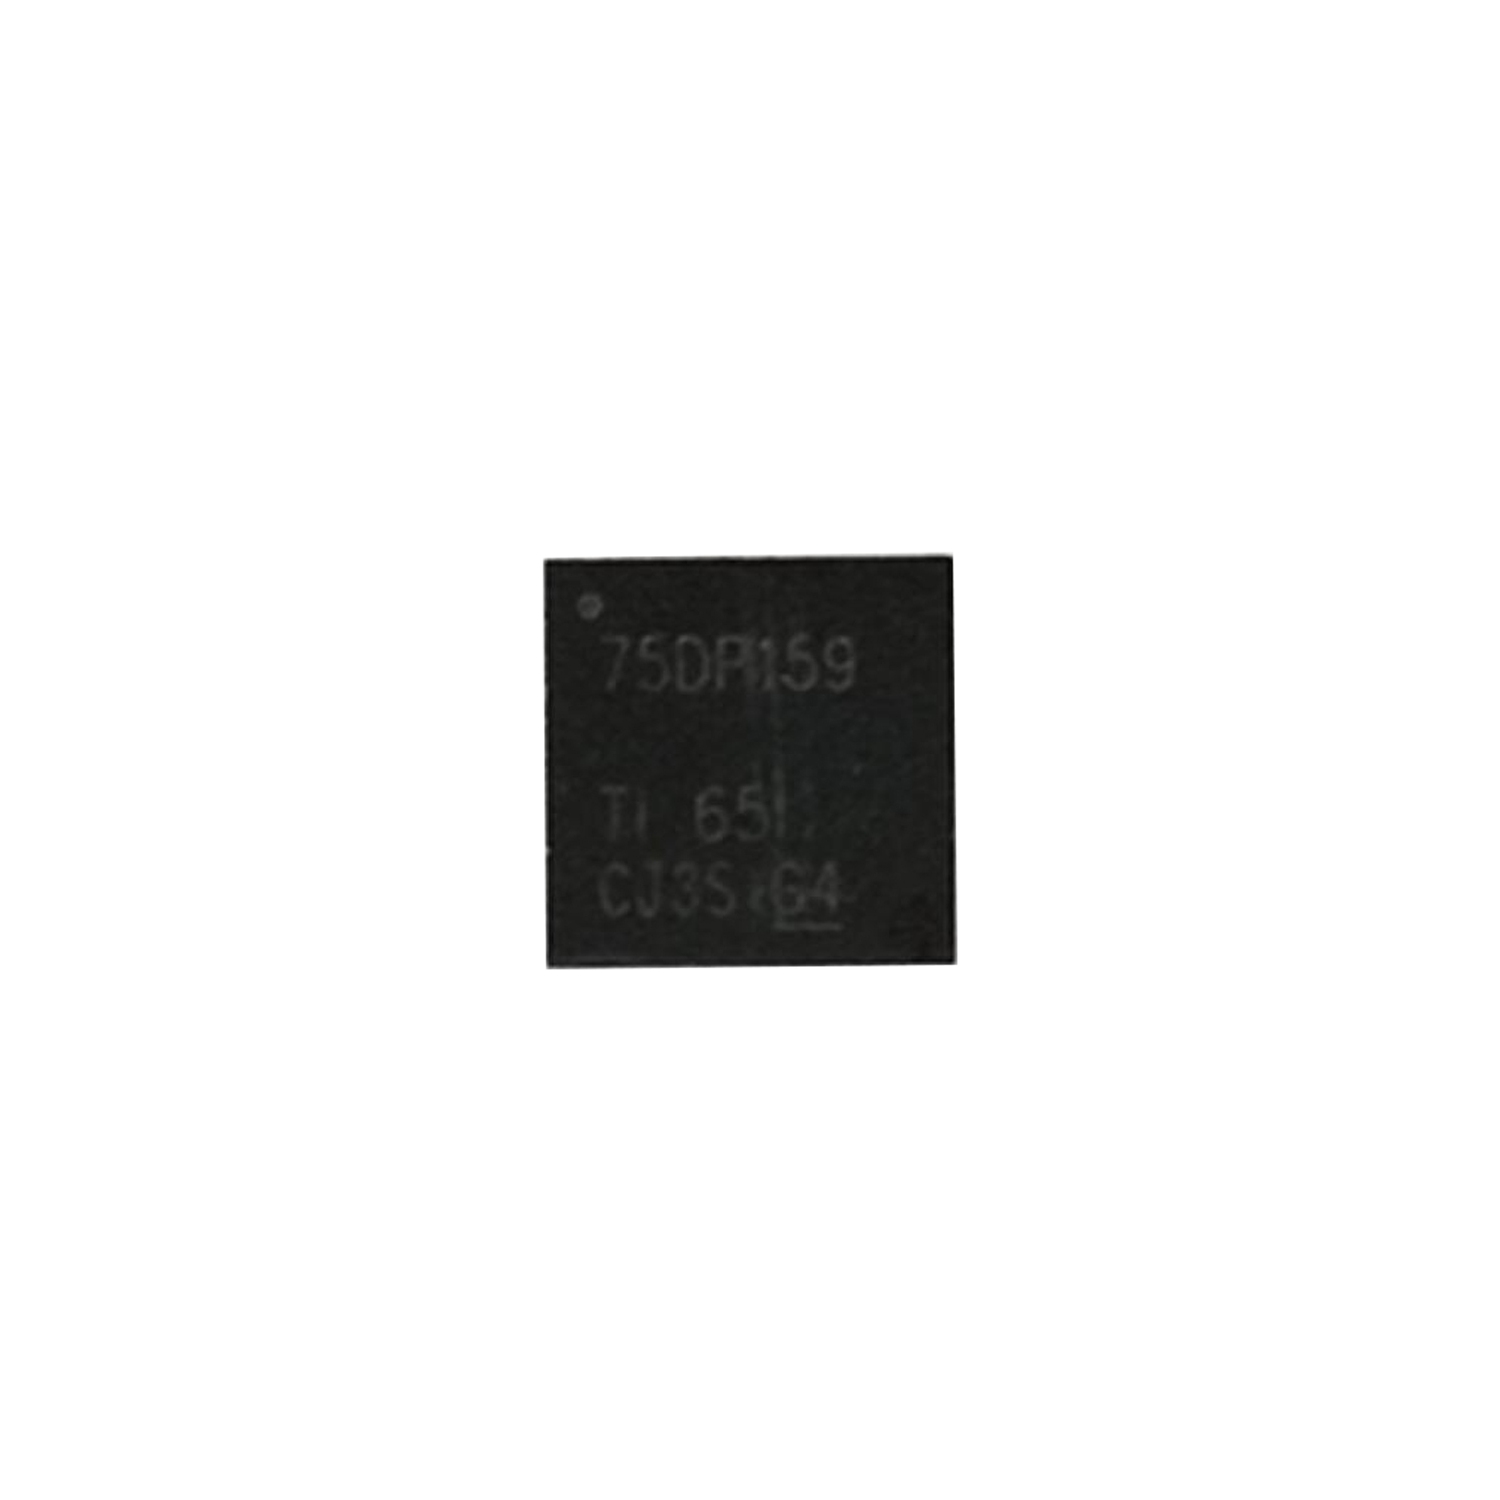 Replacement HDMI Control IC Chip SN75DP159 40VQFN For Microsoft Xbox One S